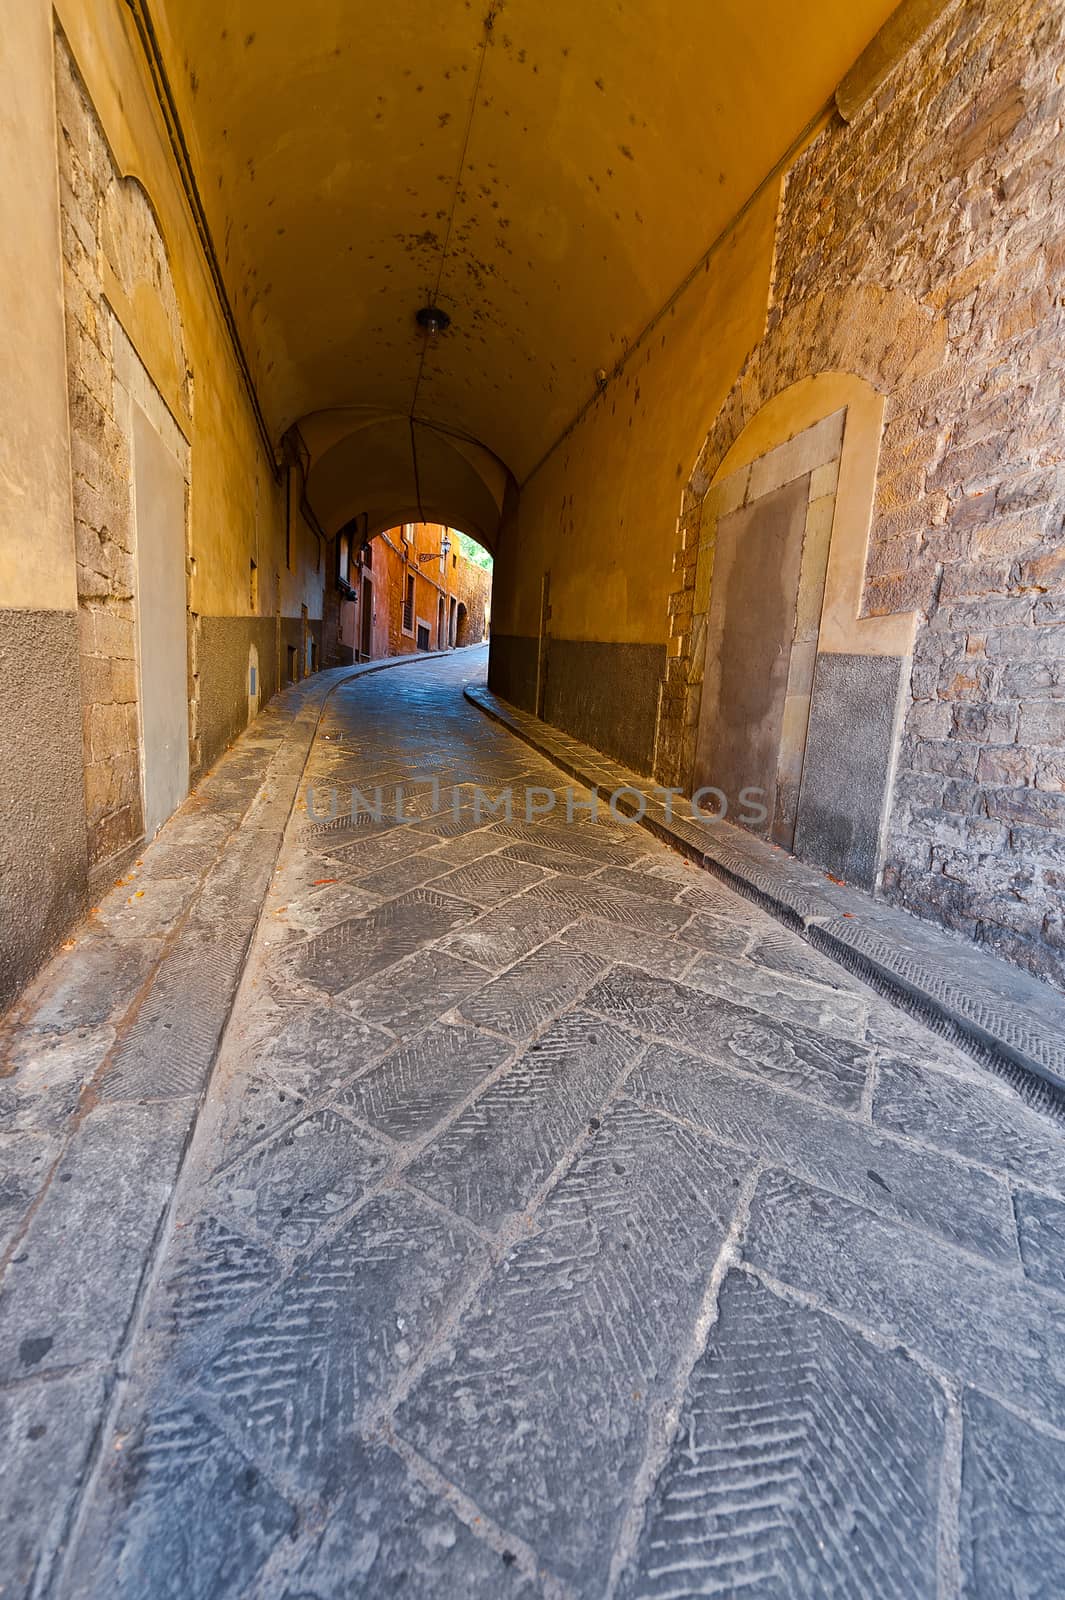 Narrow Passage with Old Buildings in Italian City